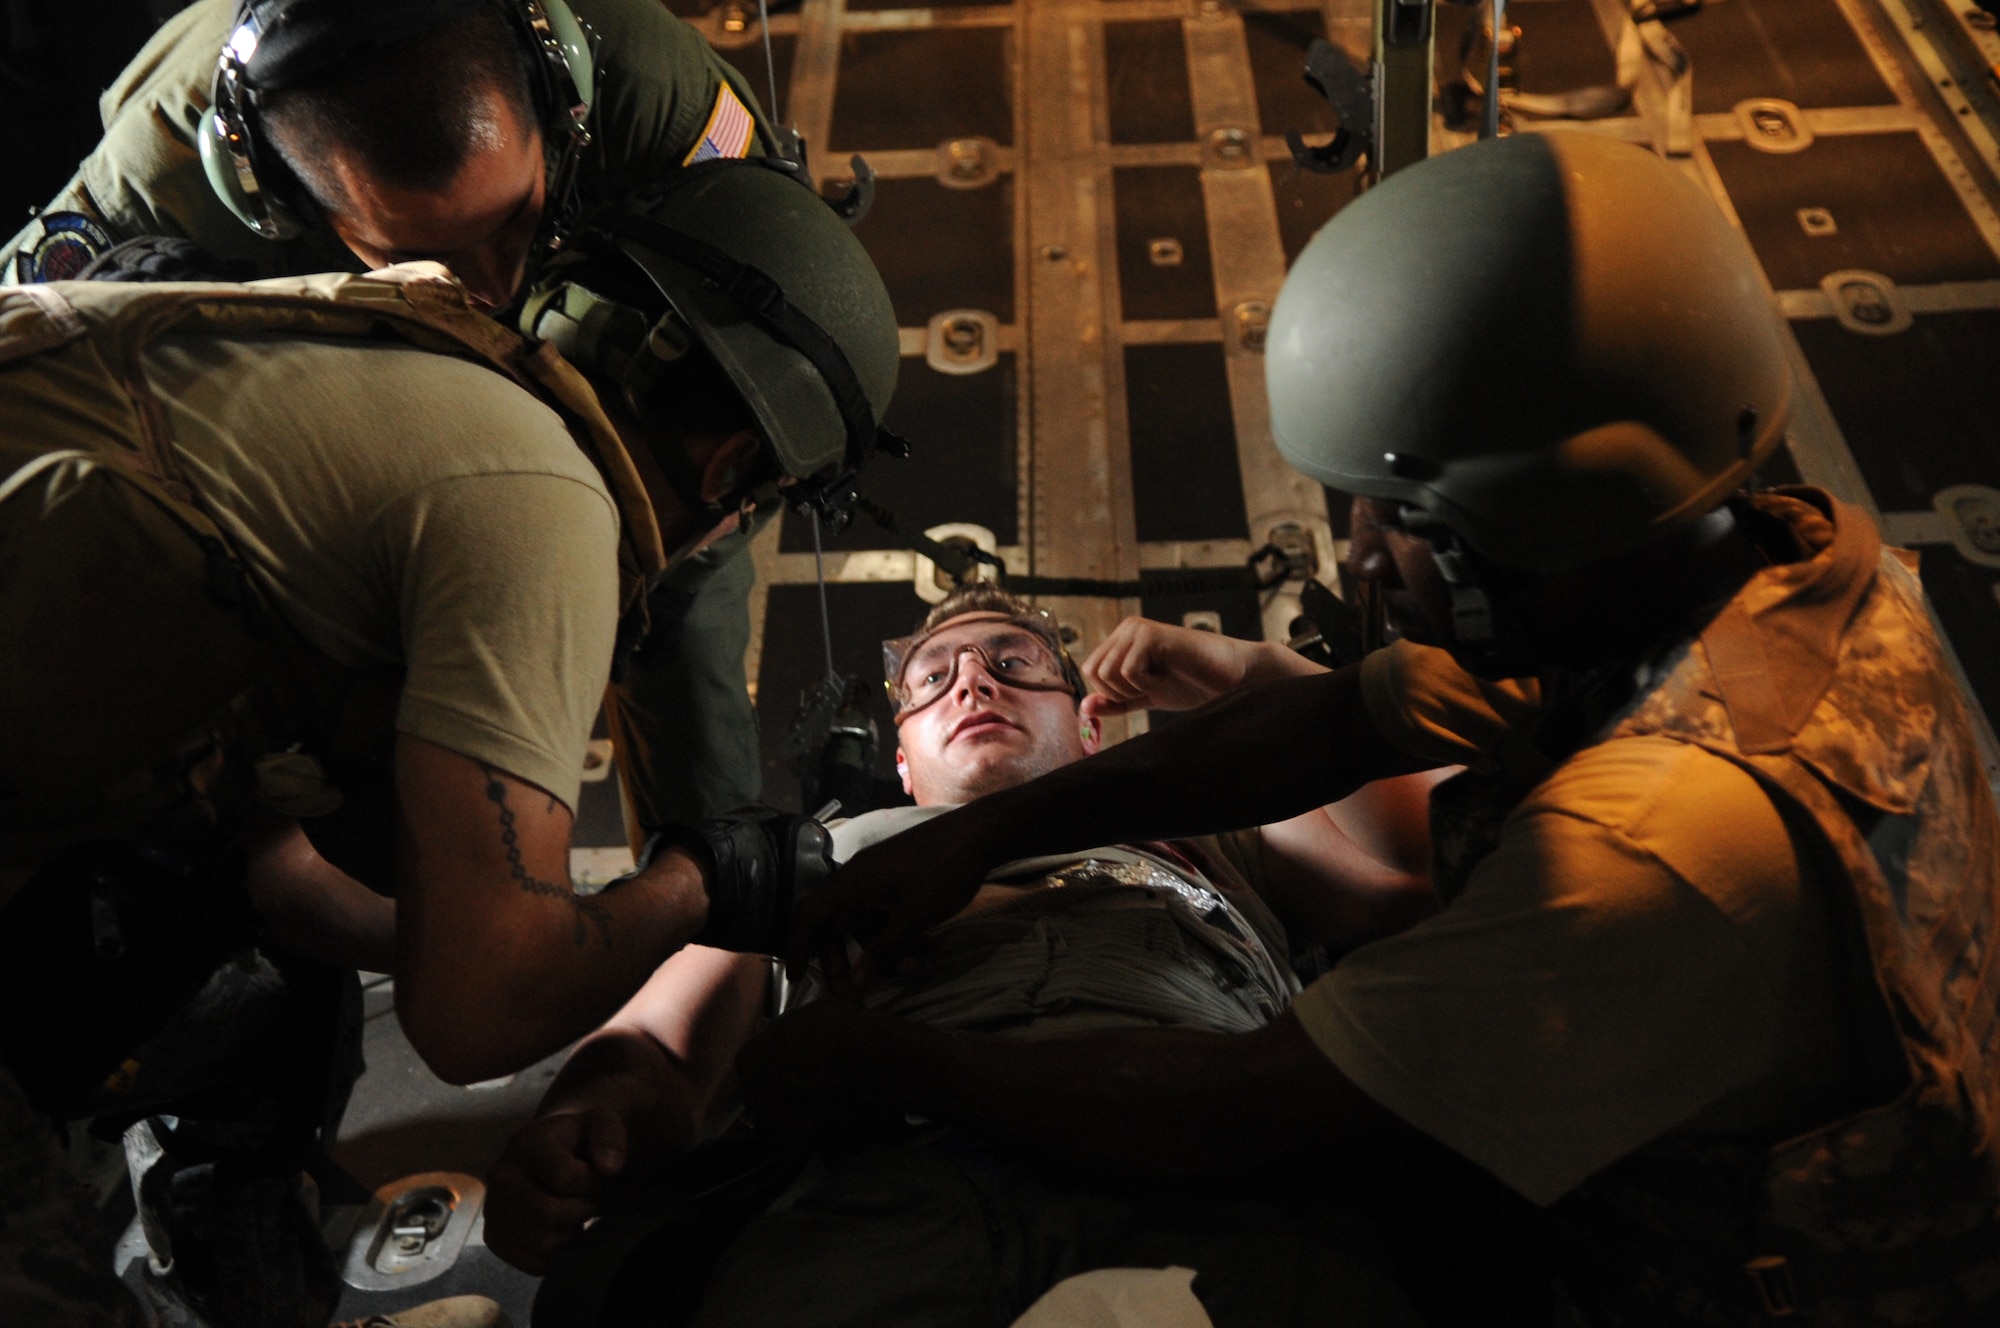 Students attending the Air Force Special Operations Command Casualty Evacuation course prepare to insert an IV into a simulated patient onboard an MC-130 Aug. 9 during a simulated casualty evacuation. During the two week CASEVAC Course, students were placed in stressful situations to help them apply their skill sets in austere stressful environments, like the back of a MC-130 during low level flight. (DoD photo by Airman Caitlin O'Neil-Mckeown)